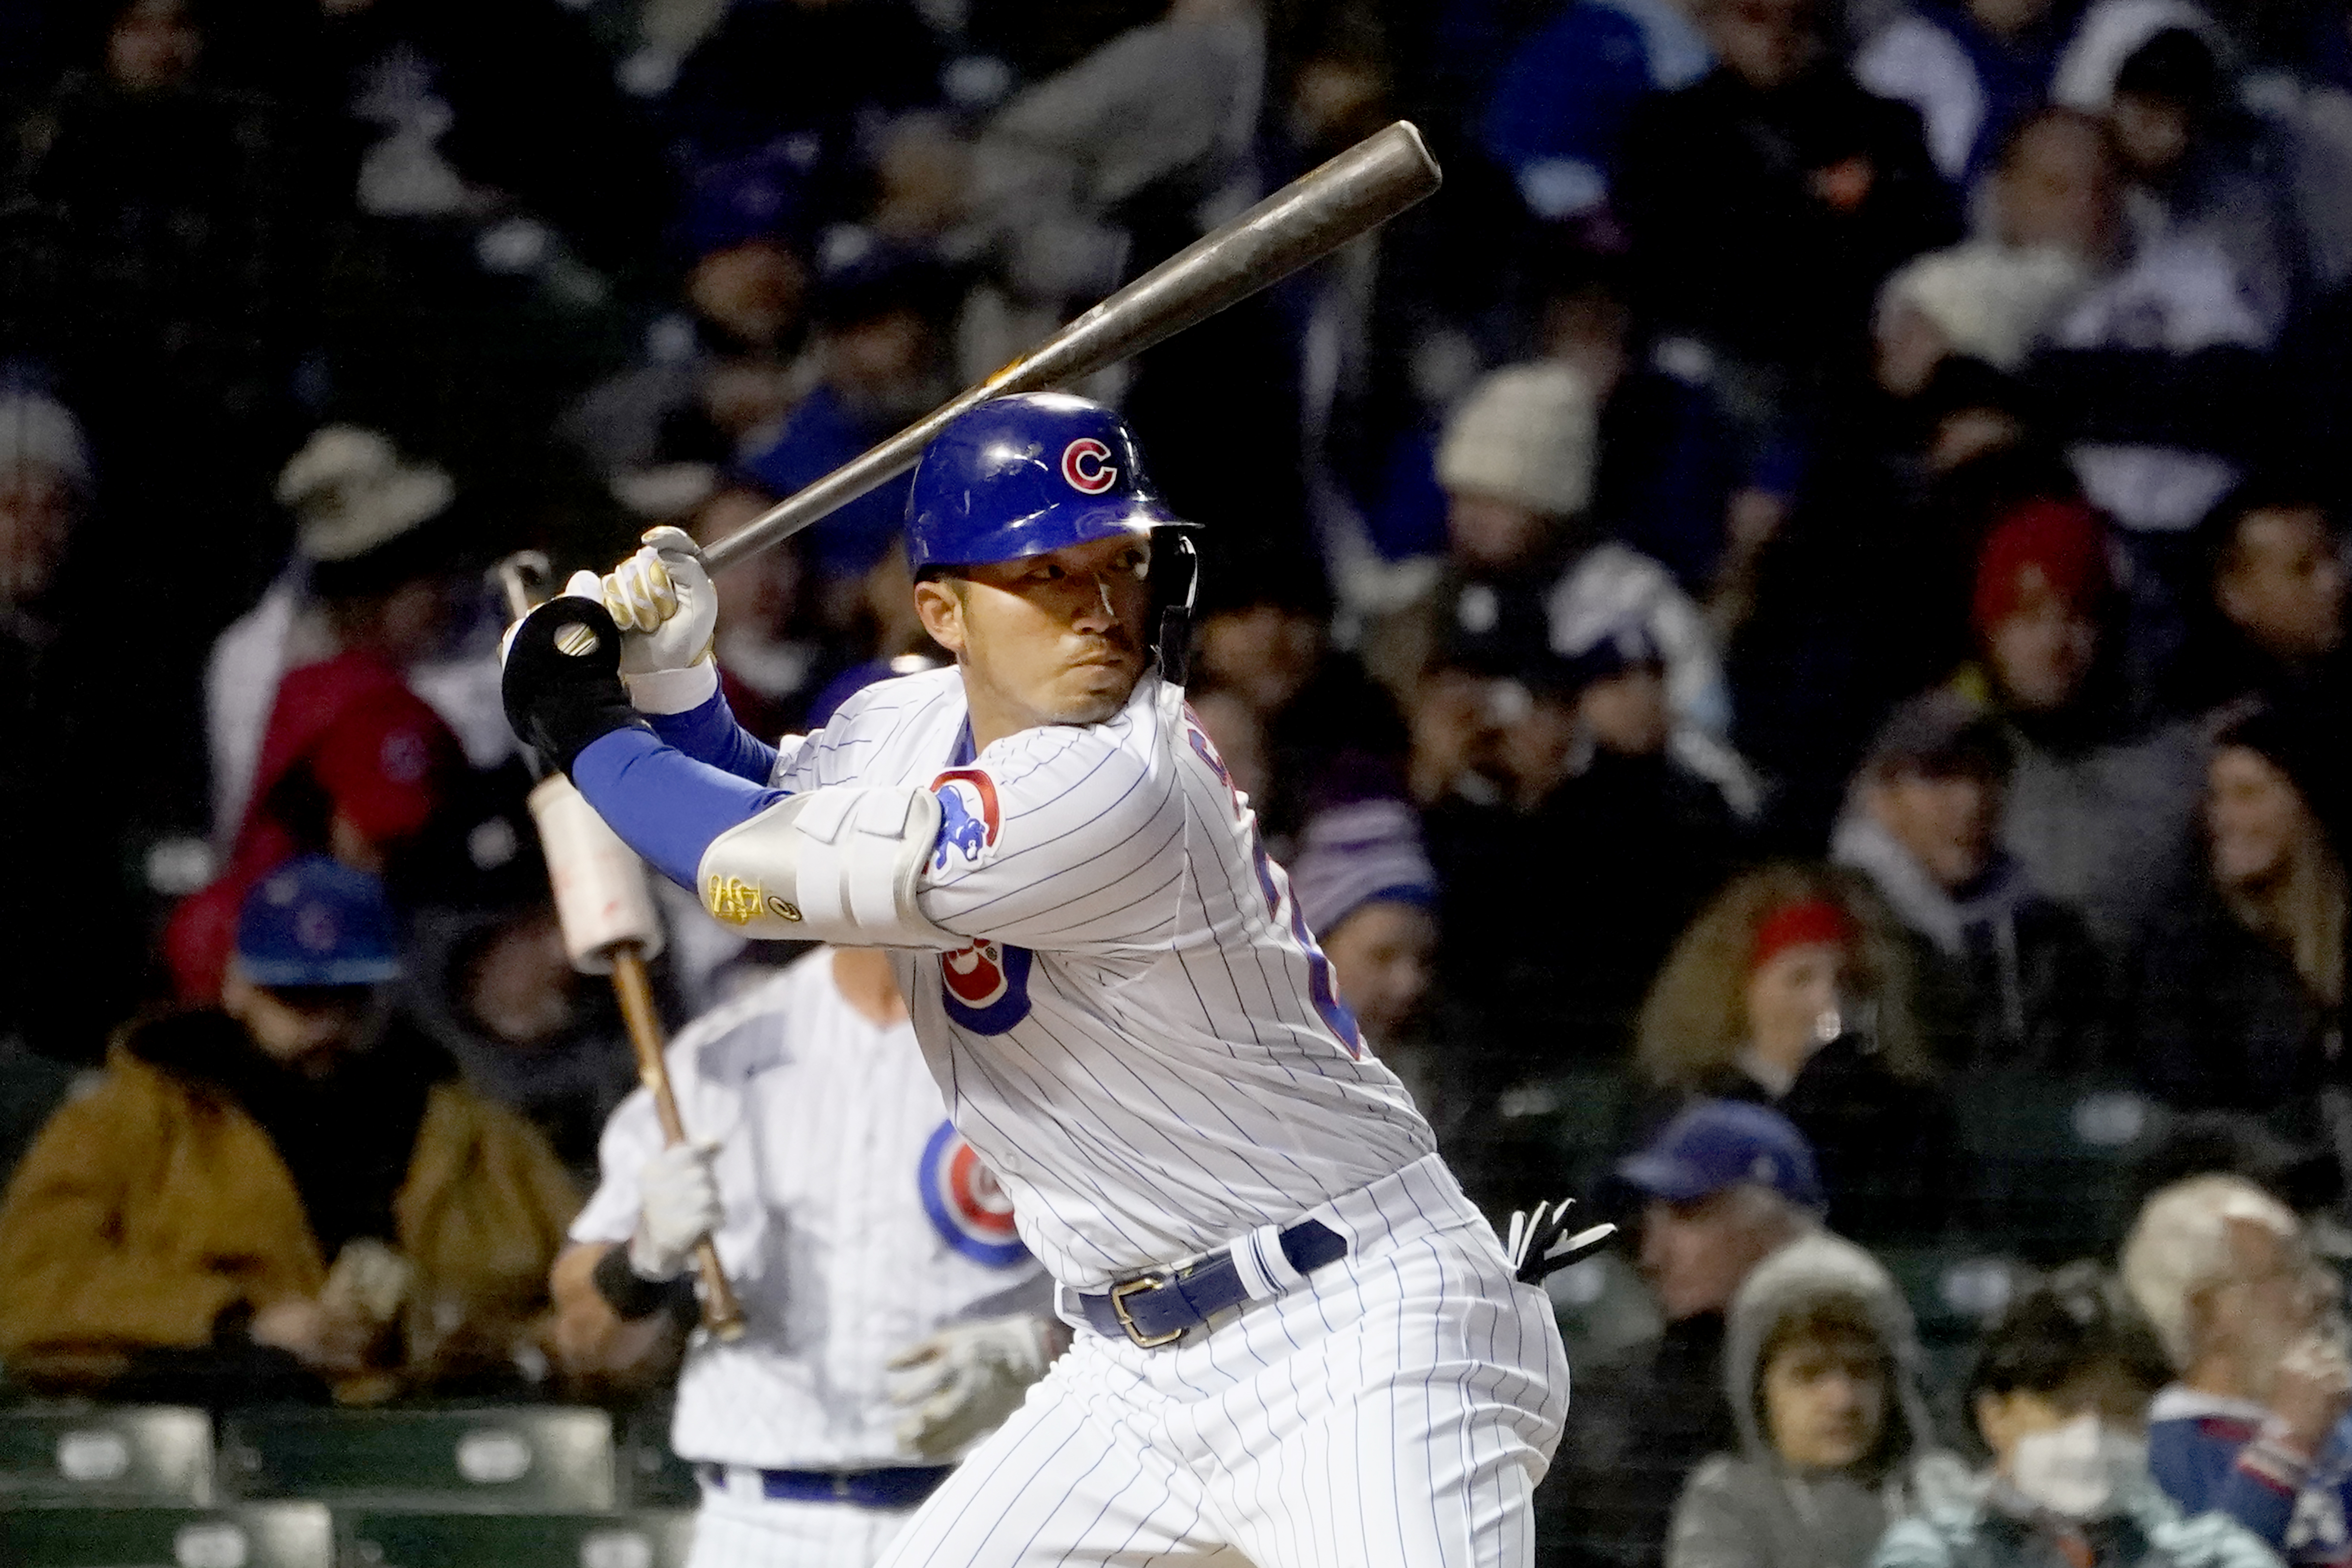 Cubs' Seiya Suzuki to wear No. 27 jersey because of Mike Trout